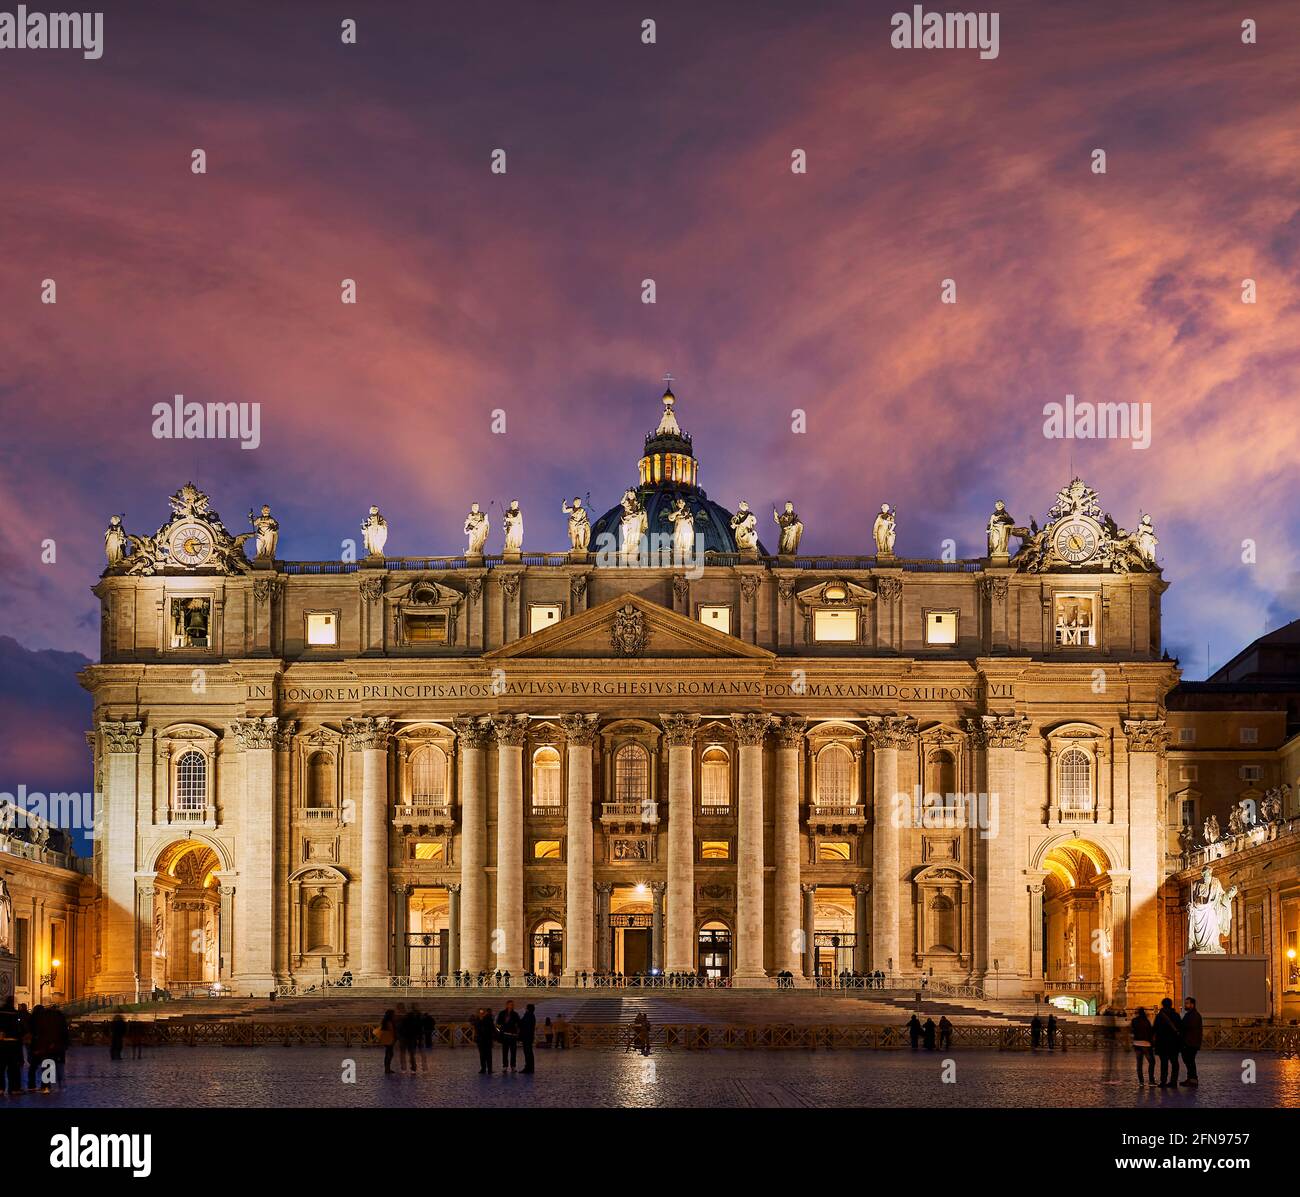 The Papal Basilica of Saint Peter in the Vatican or Saint Peter's Basilica at sunset. Rome Italy Stock Photo